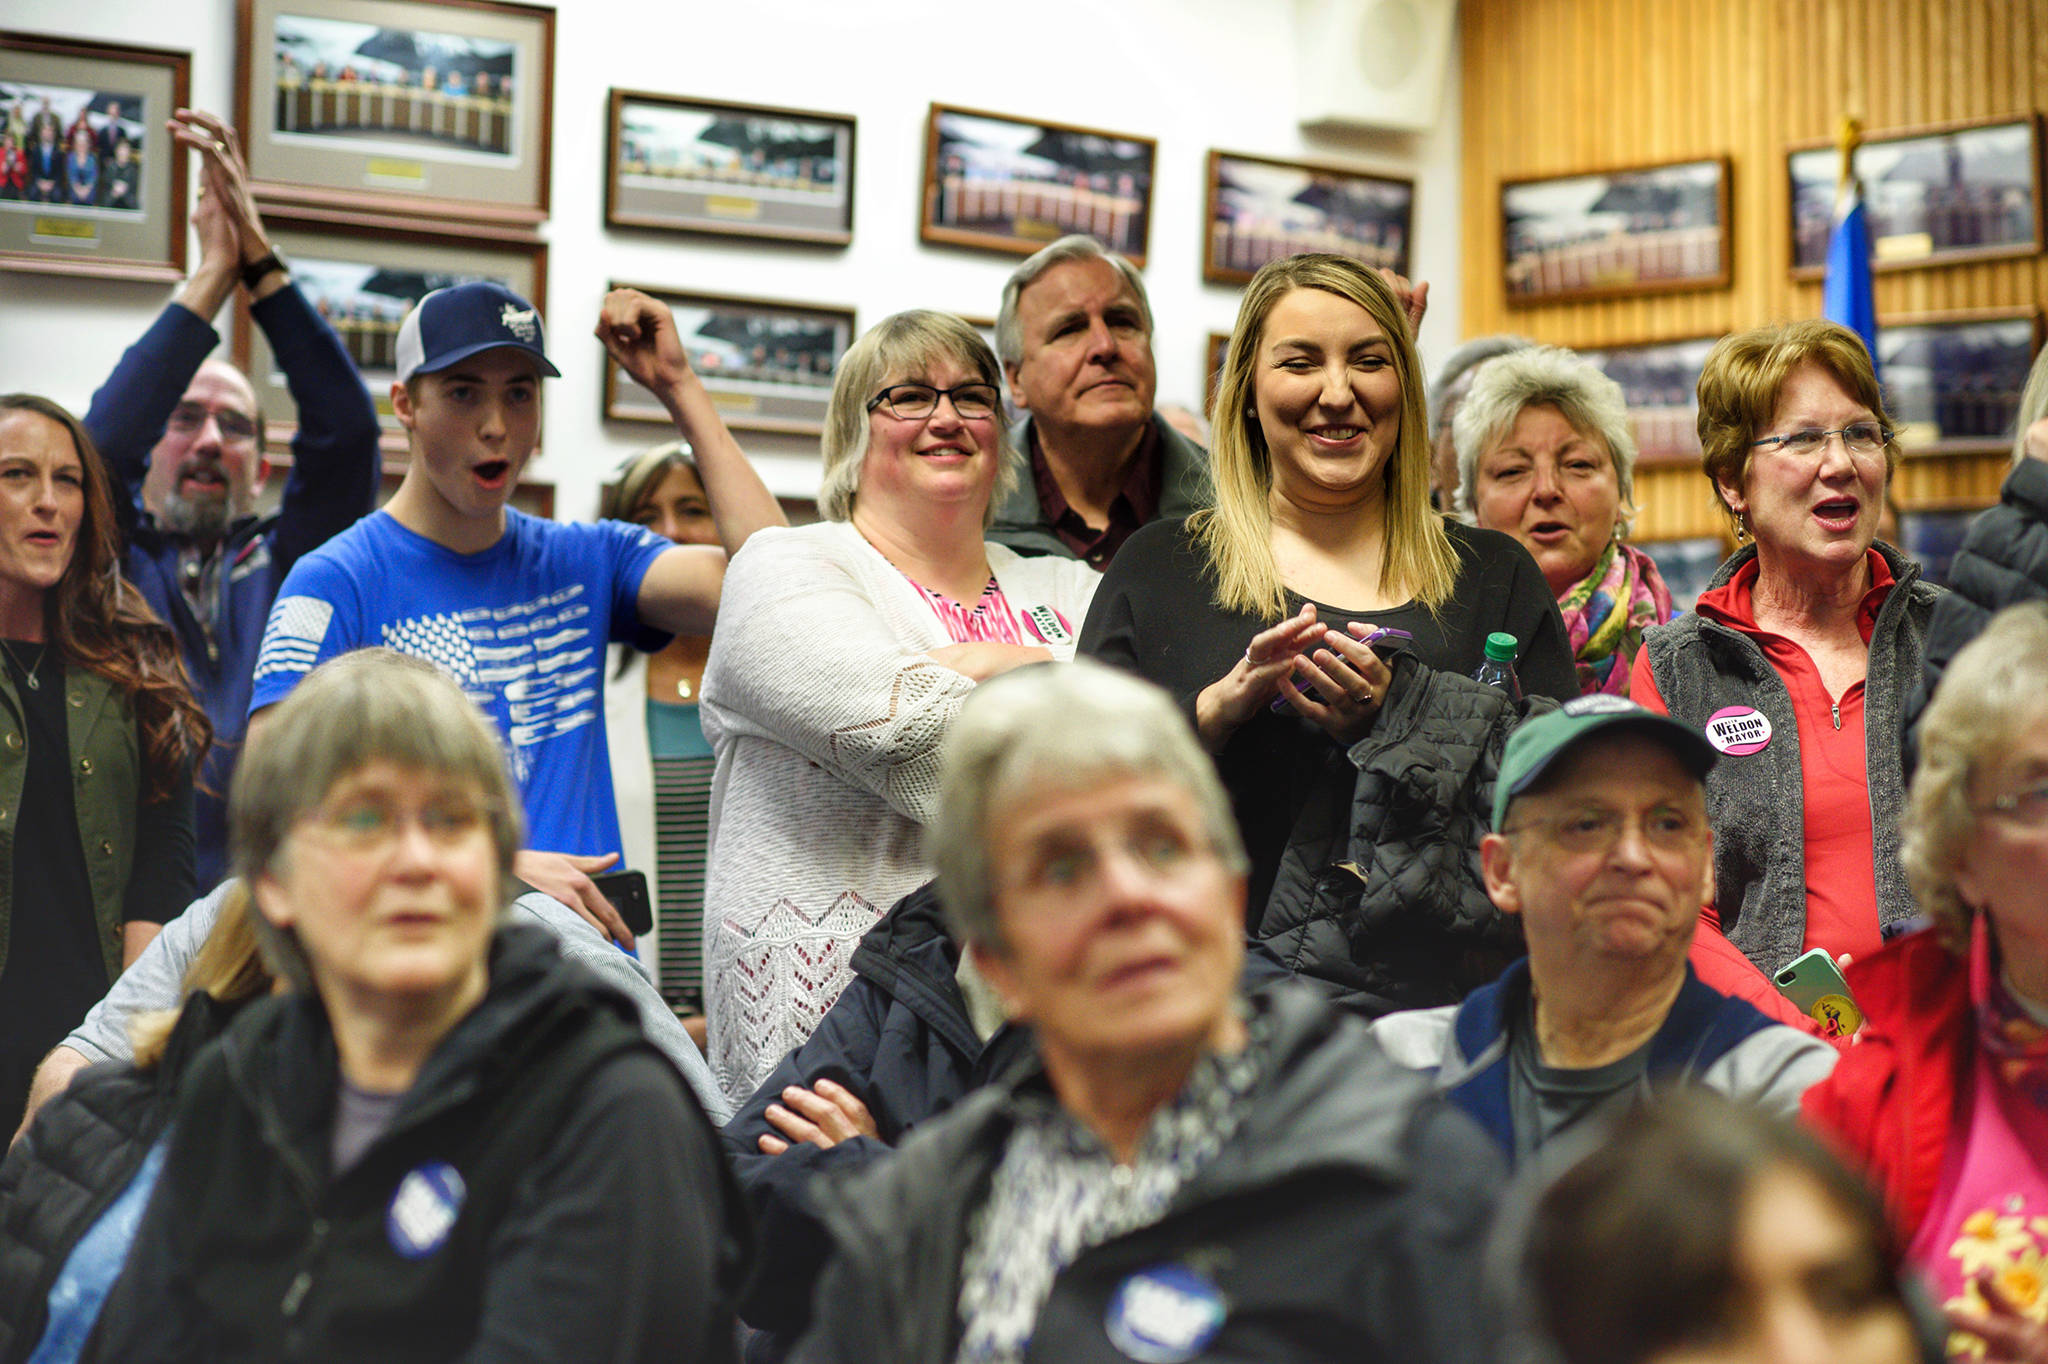 Beth Weldon and supports react to a lead in the polls as results came in live at Election Central at City Hall on Oct. 2, 2018. (Michael Penn | Juneau Empire)